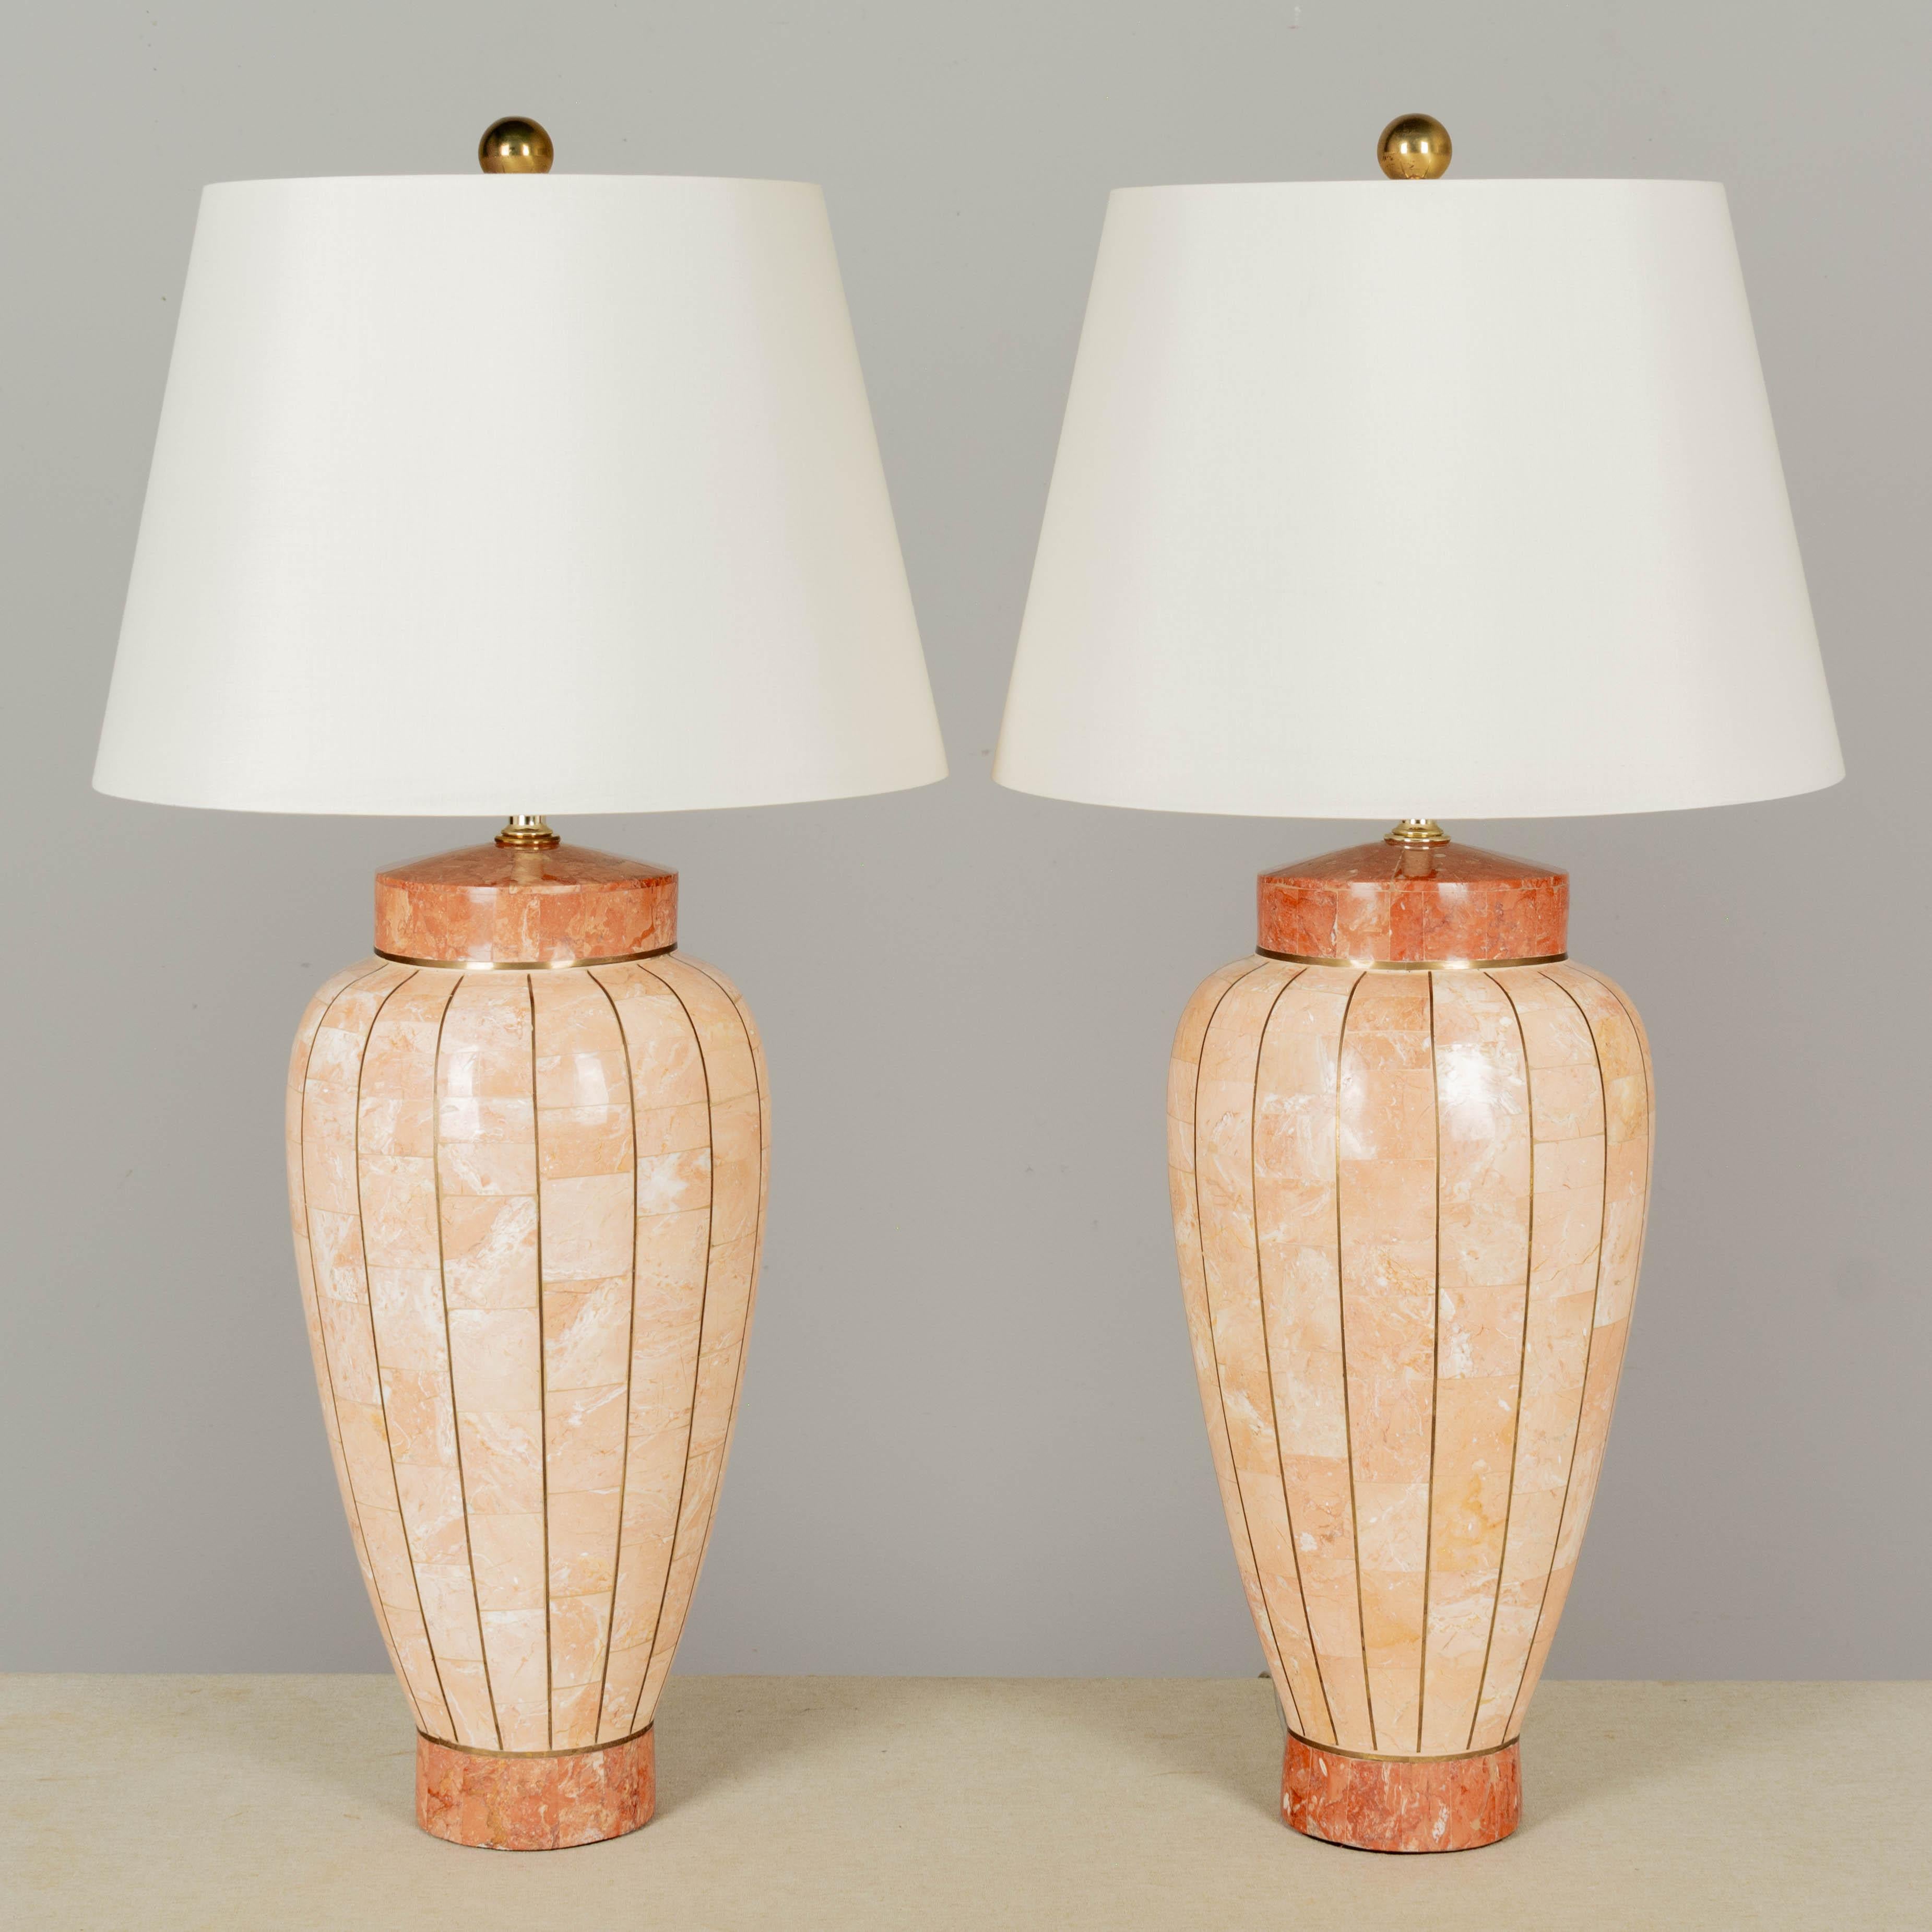 A pair of Maitland Smith tessellated stone table lamps with thin strips of brass inlay. Beautiful seashell peach polished marble tile body with coral color at the base and top. Large brass ball finials. Rewired with new sockets and cords. Excellent